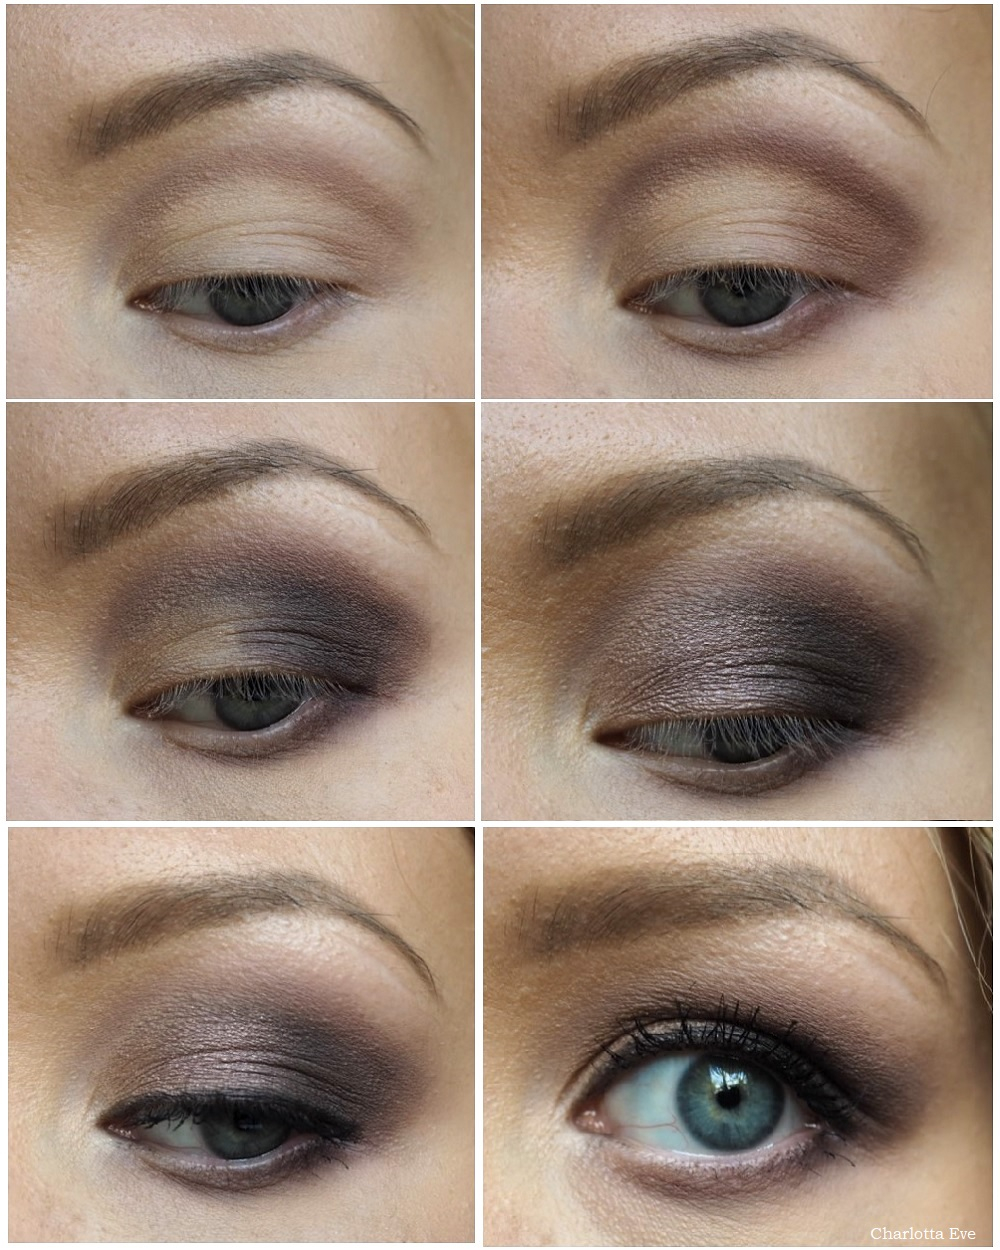 Eyes Pictures With Makeup How To Makeup For Deep Set Hooded Eyes Charlotta Eve